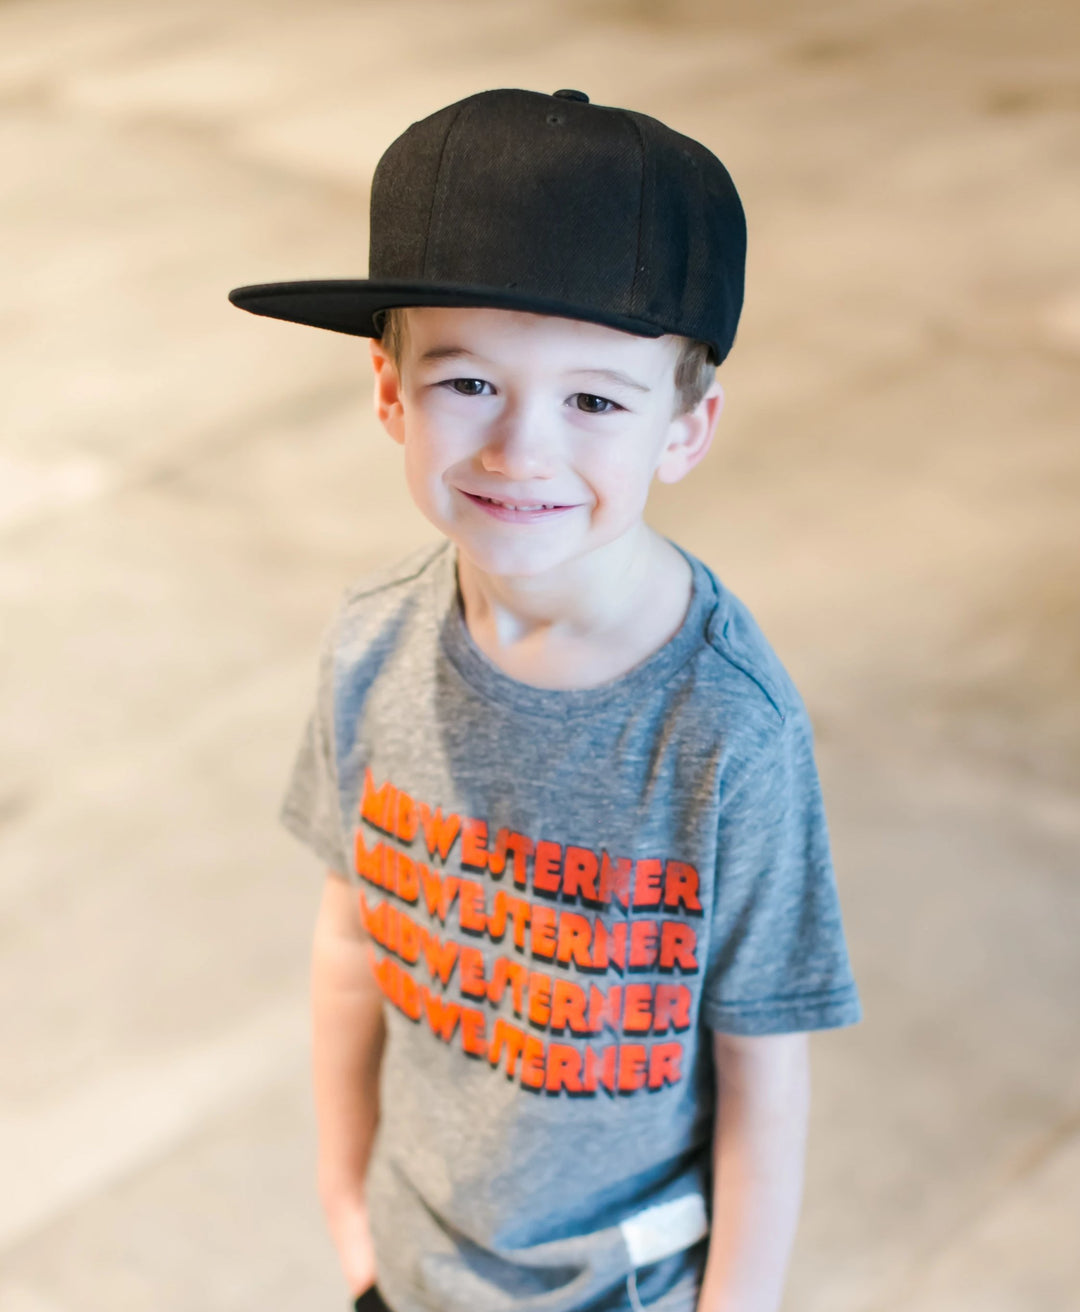 Baby and Children's SnapBack Hat in Black